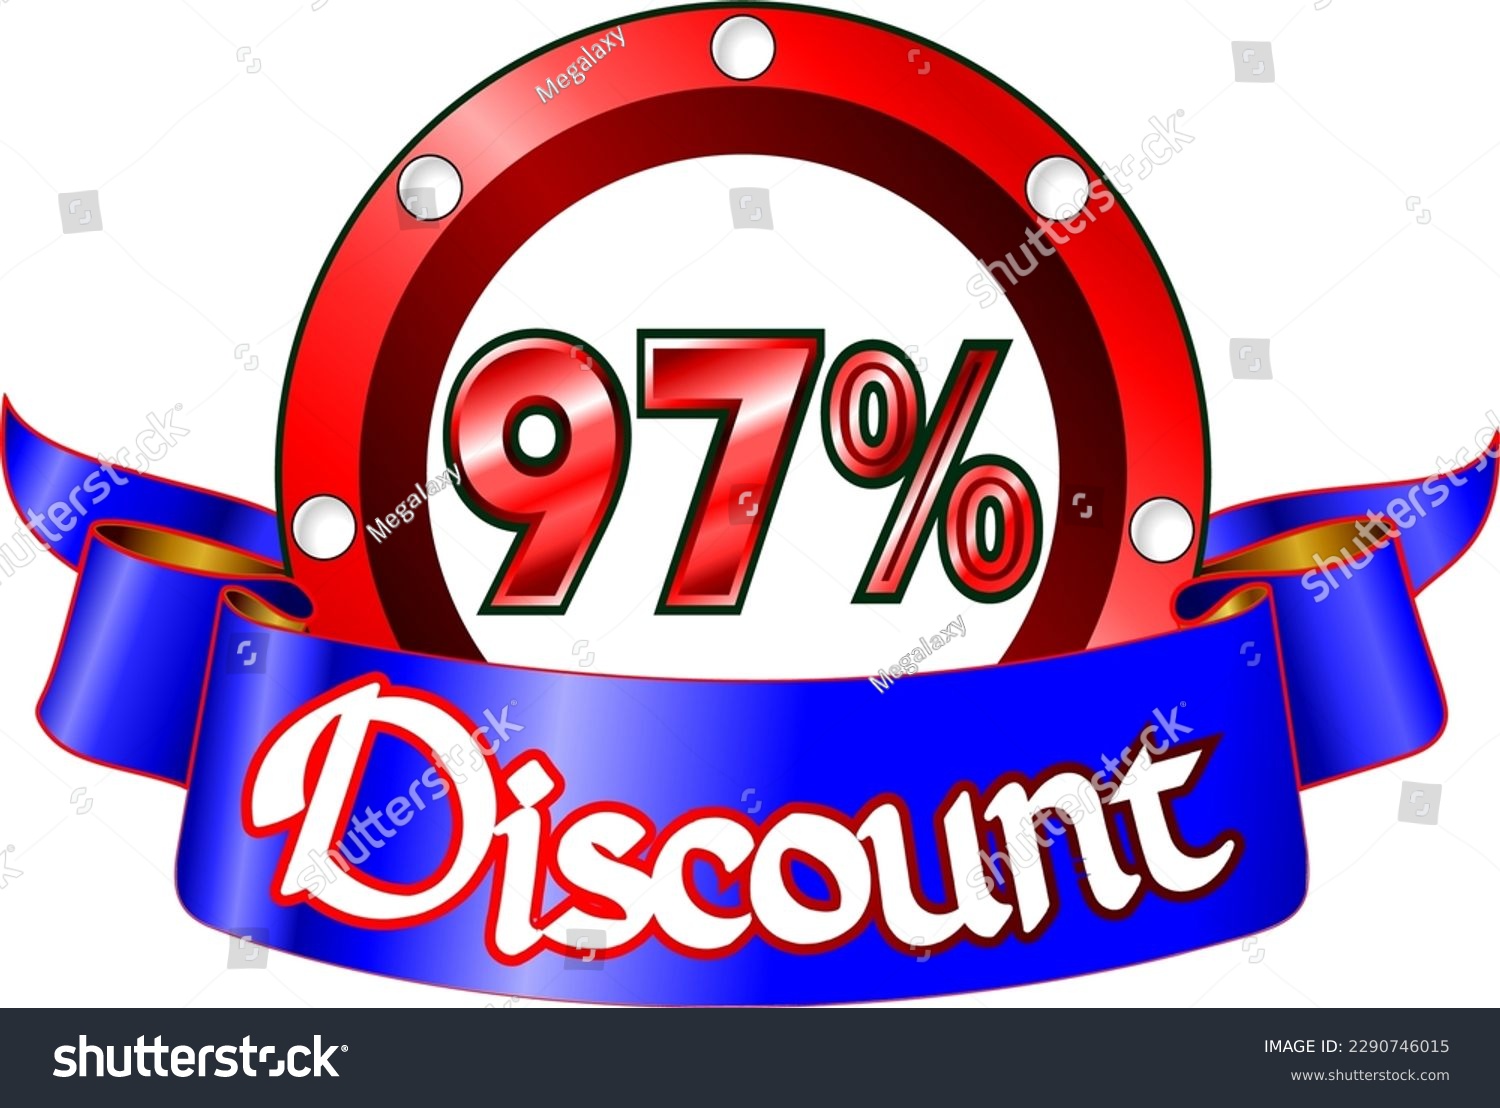 SVG of 97 percent off, red disk and blue ribbon, vector illustration for wholesale and retail, illustrative art, beautiful percentage % illustration, vector banner. God is good! svg